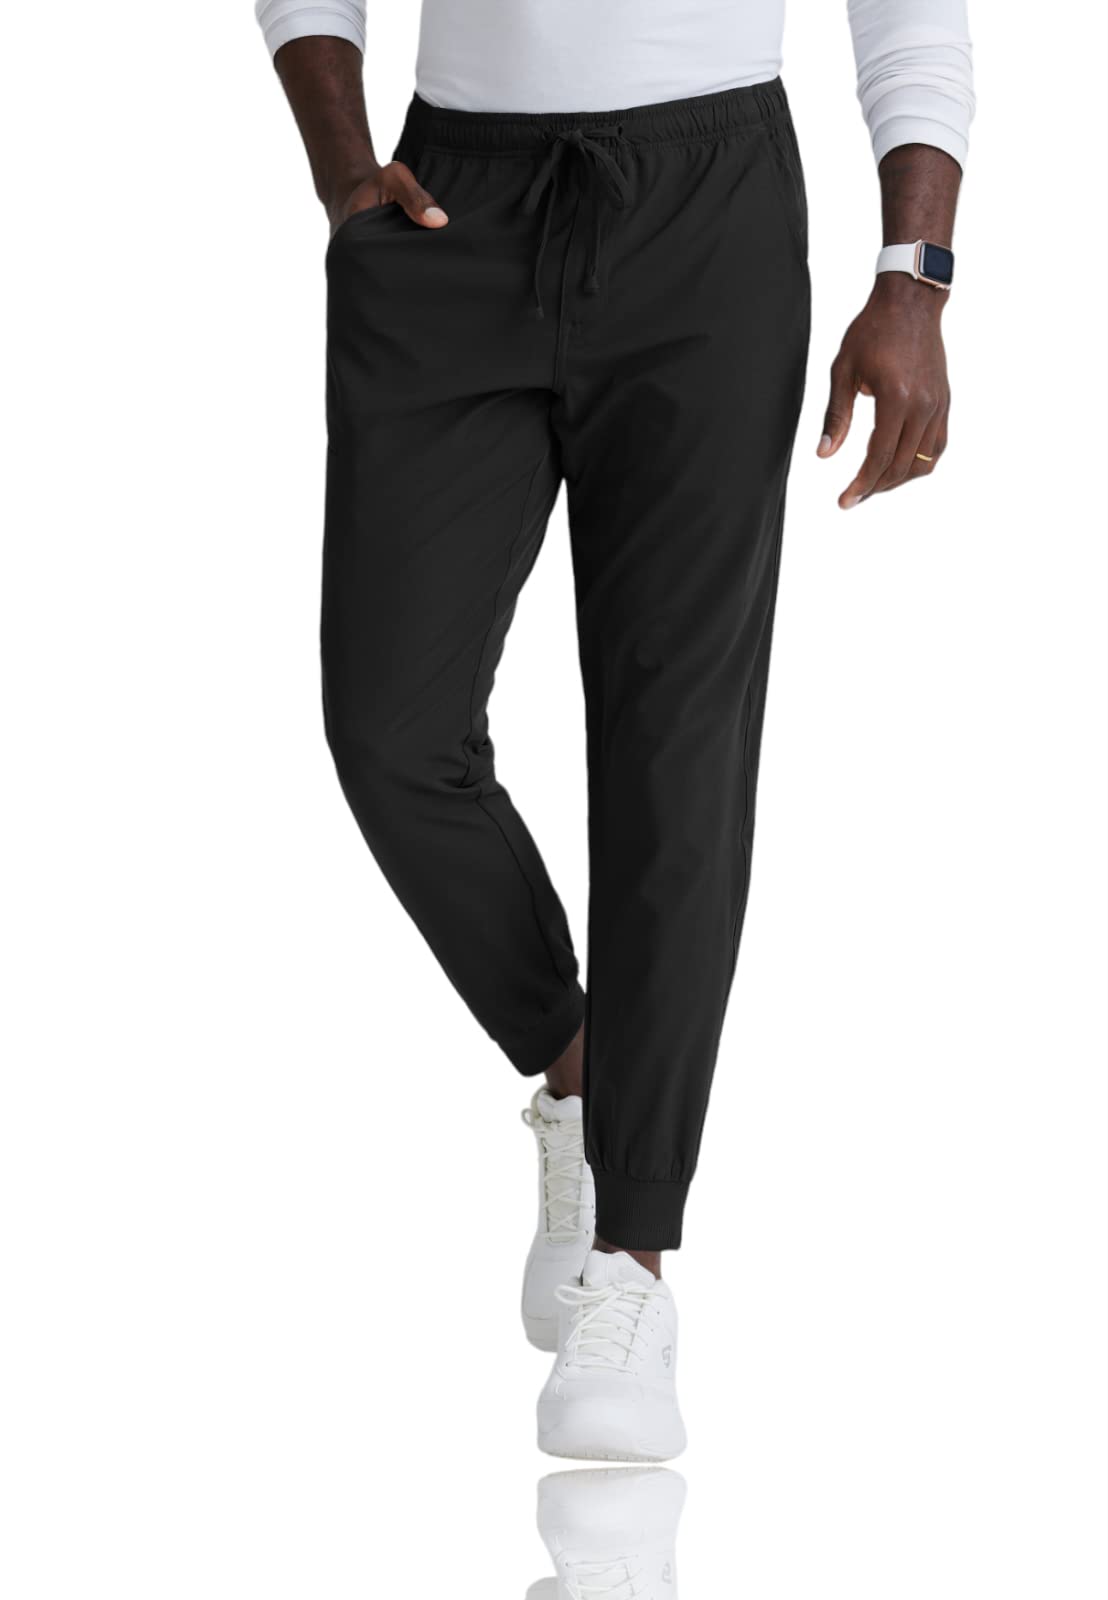 BARCO Skechers Vitality Women's Charge 4-Pocket Scrub Pant - Black : Buy  Online at Best Price in KSA - Souq is now : Fashion